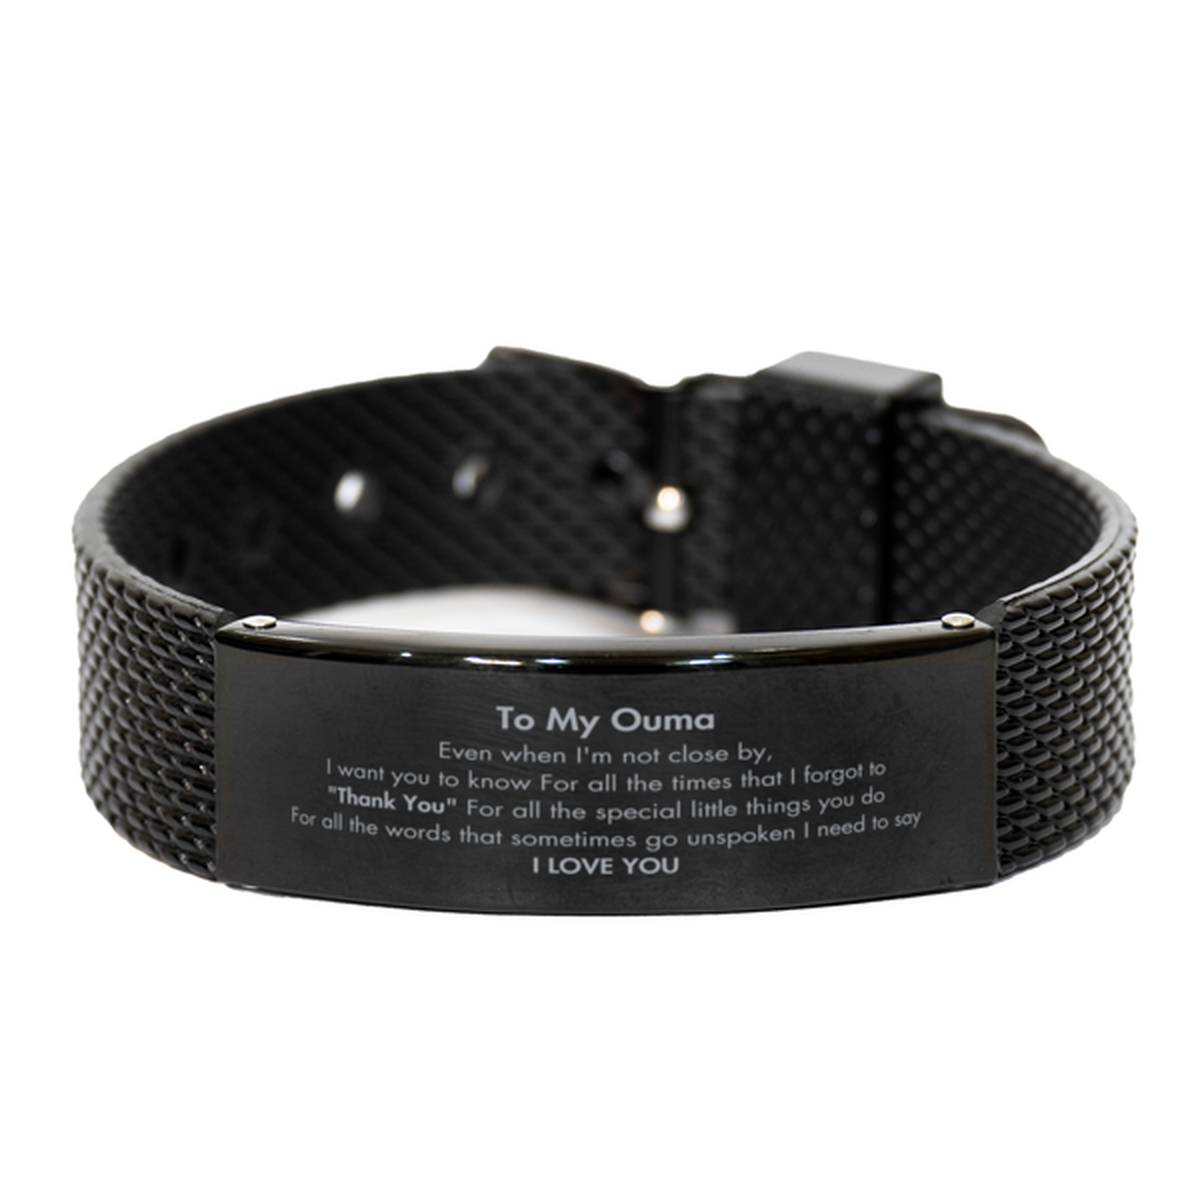 Thank You Gifts for Ouma, Keepsake Black Shark Mesh Bracelet Gifts for Ouma Birthday Mother's day Father's Day Ouma For all the words That sometimes go unspoken I need to say I LOVE YOU